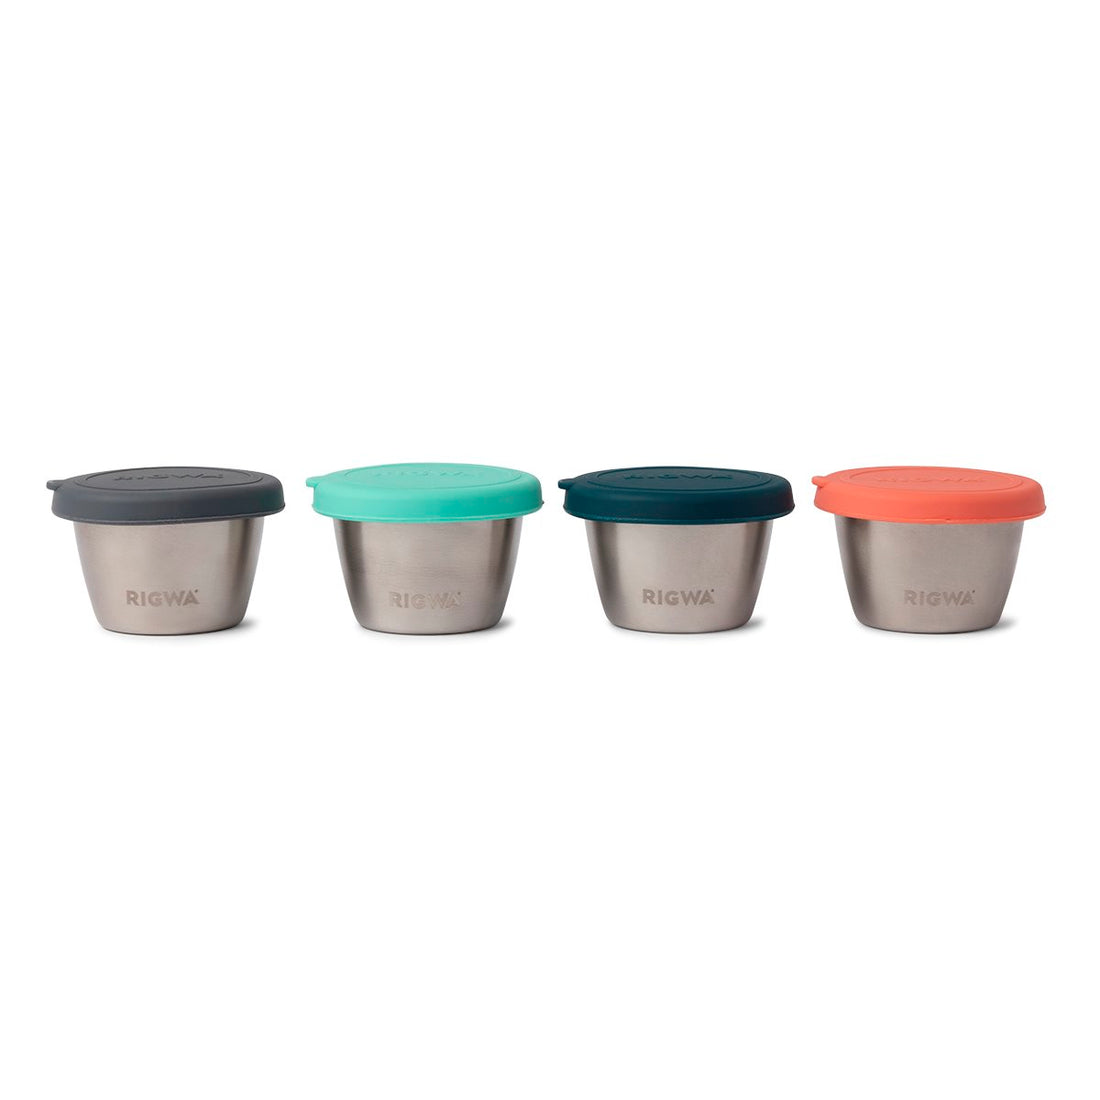 Rigwa Life Insulated Storage Bowl Divide & Conquer Inserts, Set of 2